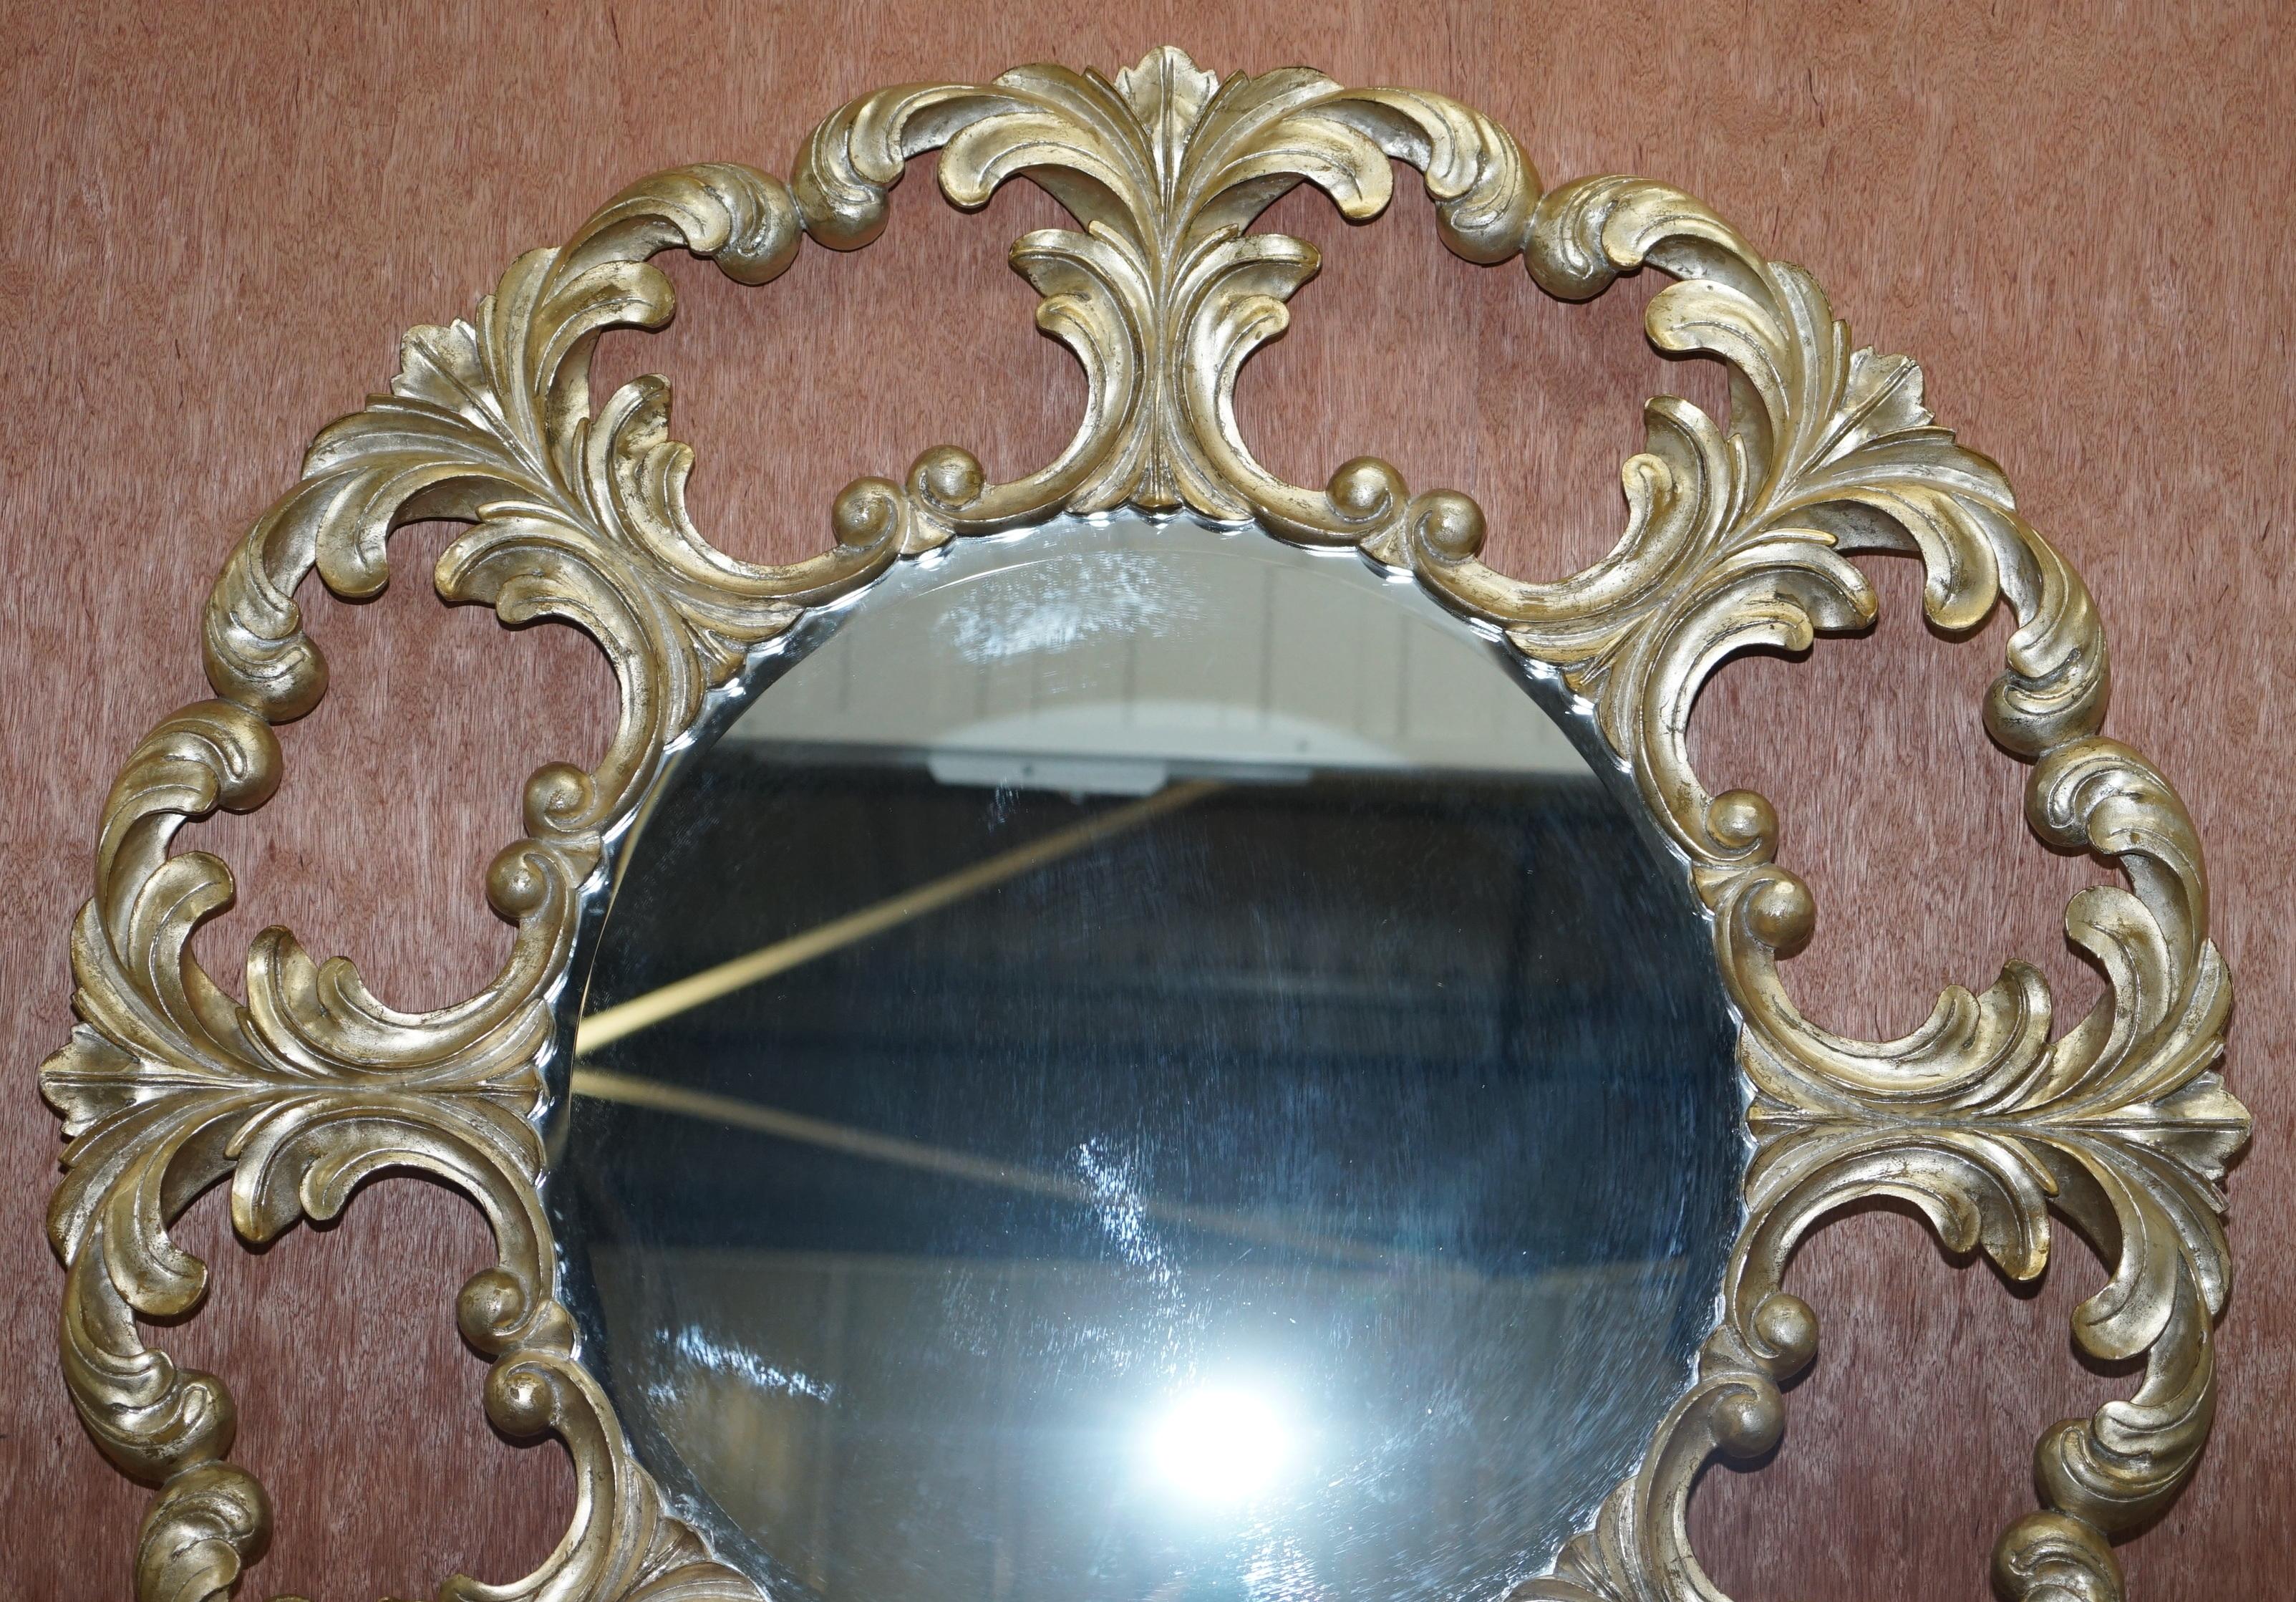 We are delighted to offer for sale 1 of 2 Original Christopher Guy RRP £2850 gold and silver leaf wood round wall mirrors

This is absolutely sublime, the frame is hand crafted from solid hardwood, beautifully sculpted and finished with real